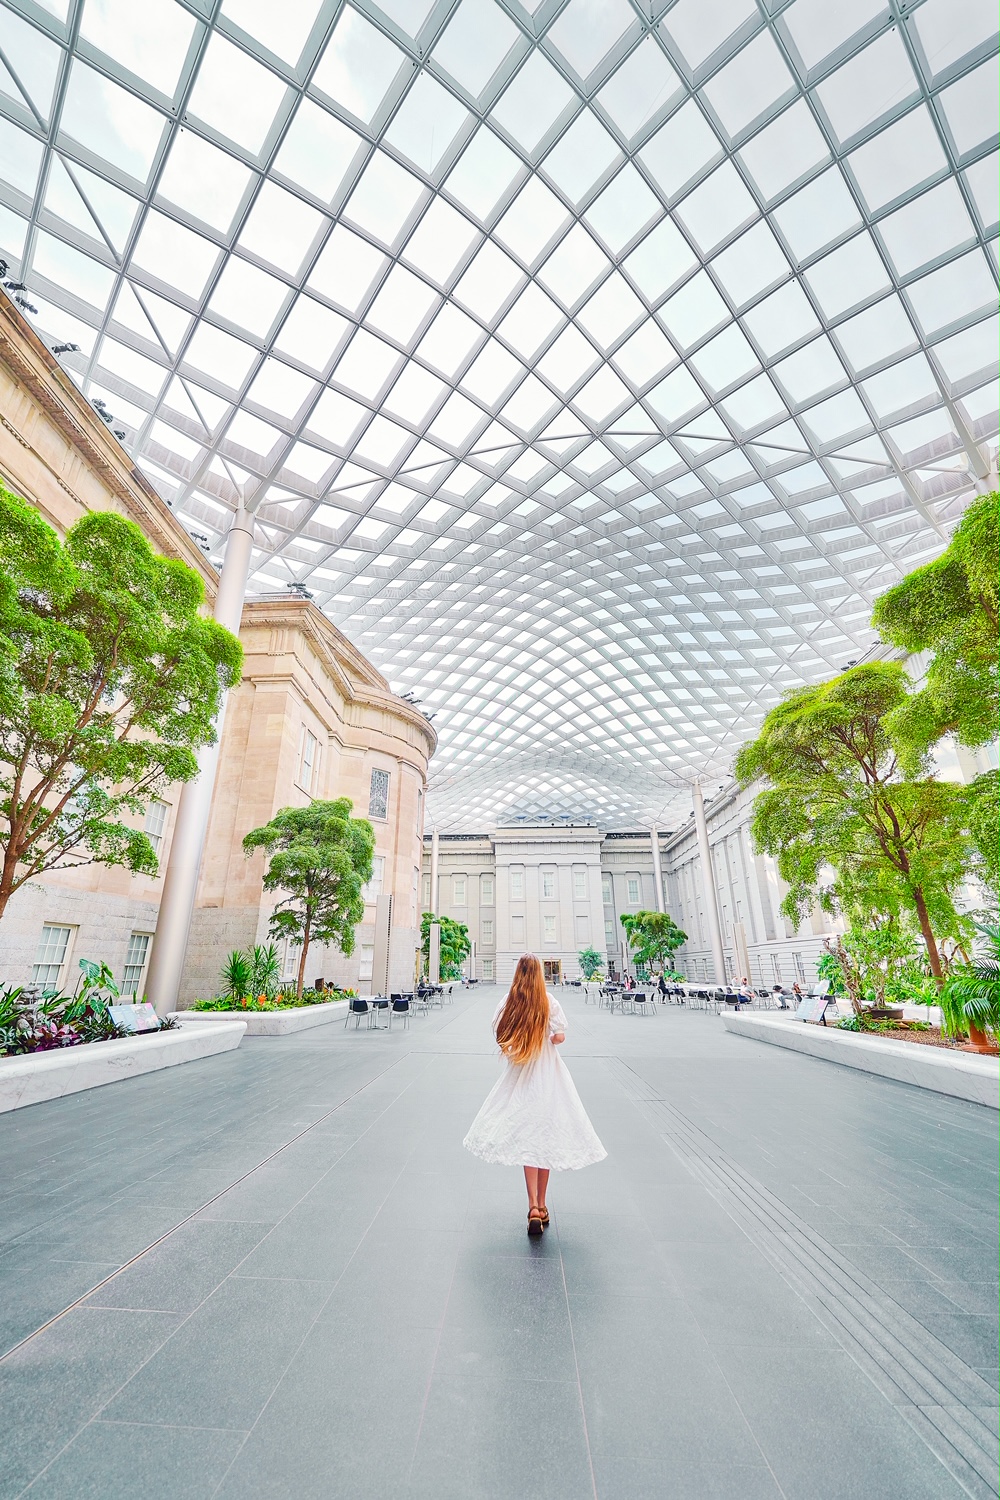 A woman in a white dress with long hair walking in the courtyard of the National  Portrait Gallery. There are tall trees, shrubs, bistro tables, building facades, and a wavy glass ceiling. 